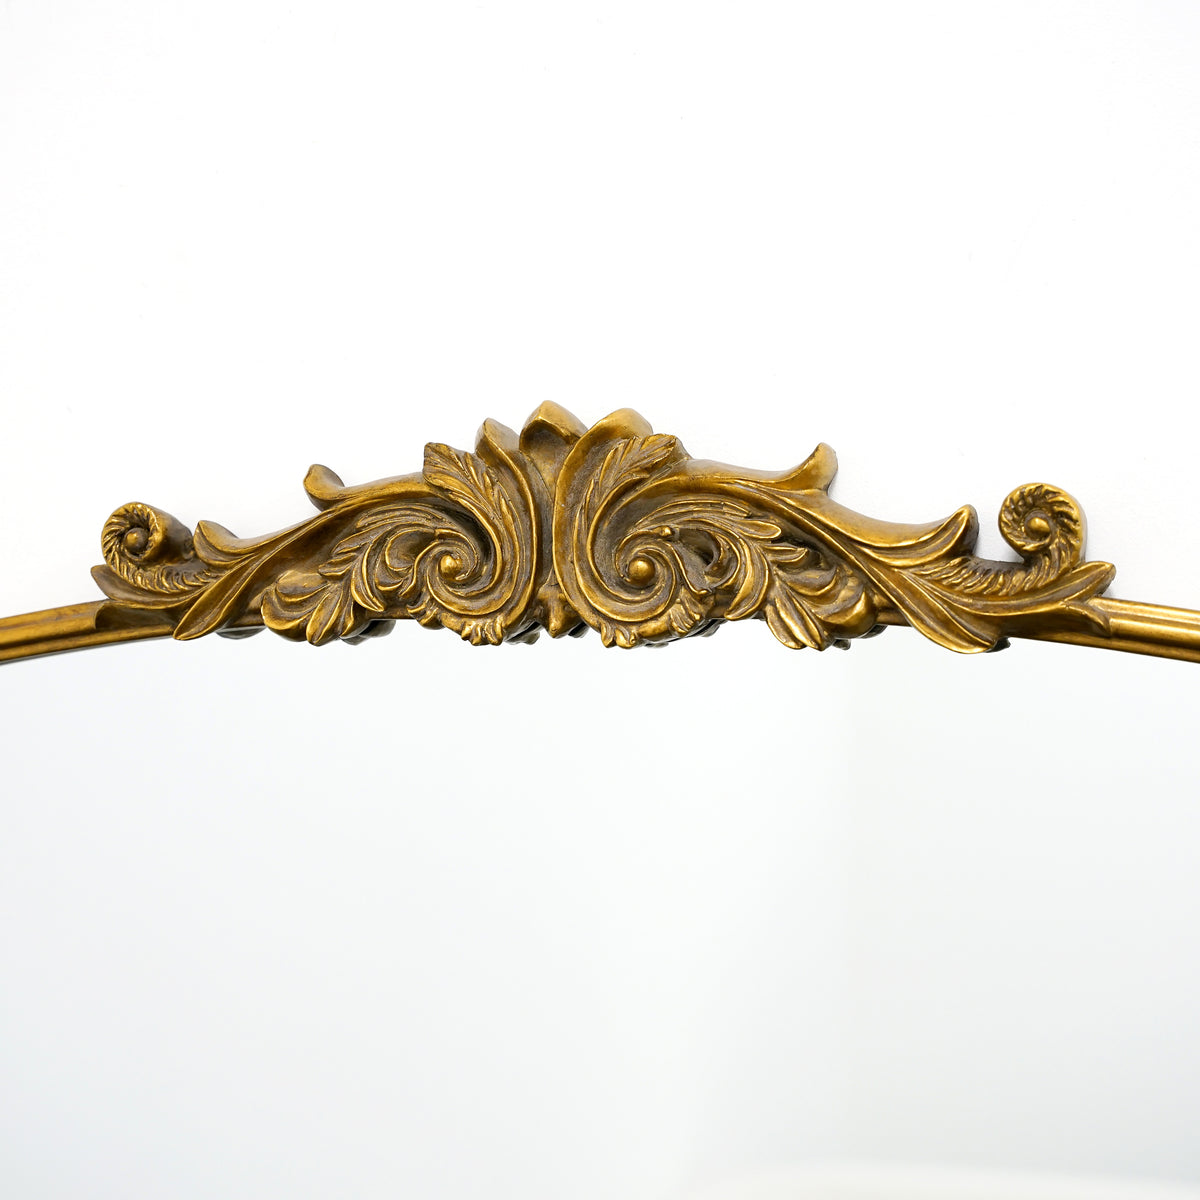 Closeup of Gold arched ornate metal overmantle mirror